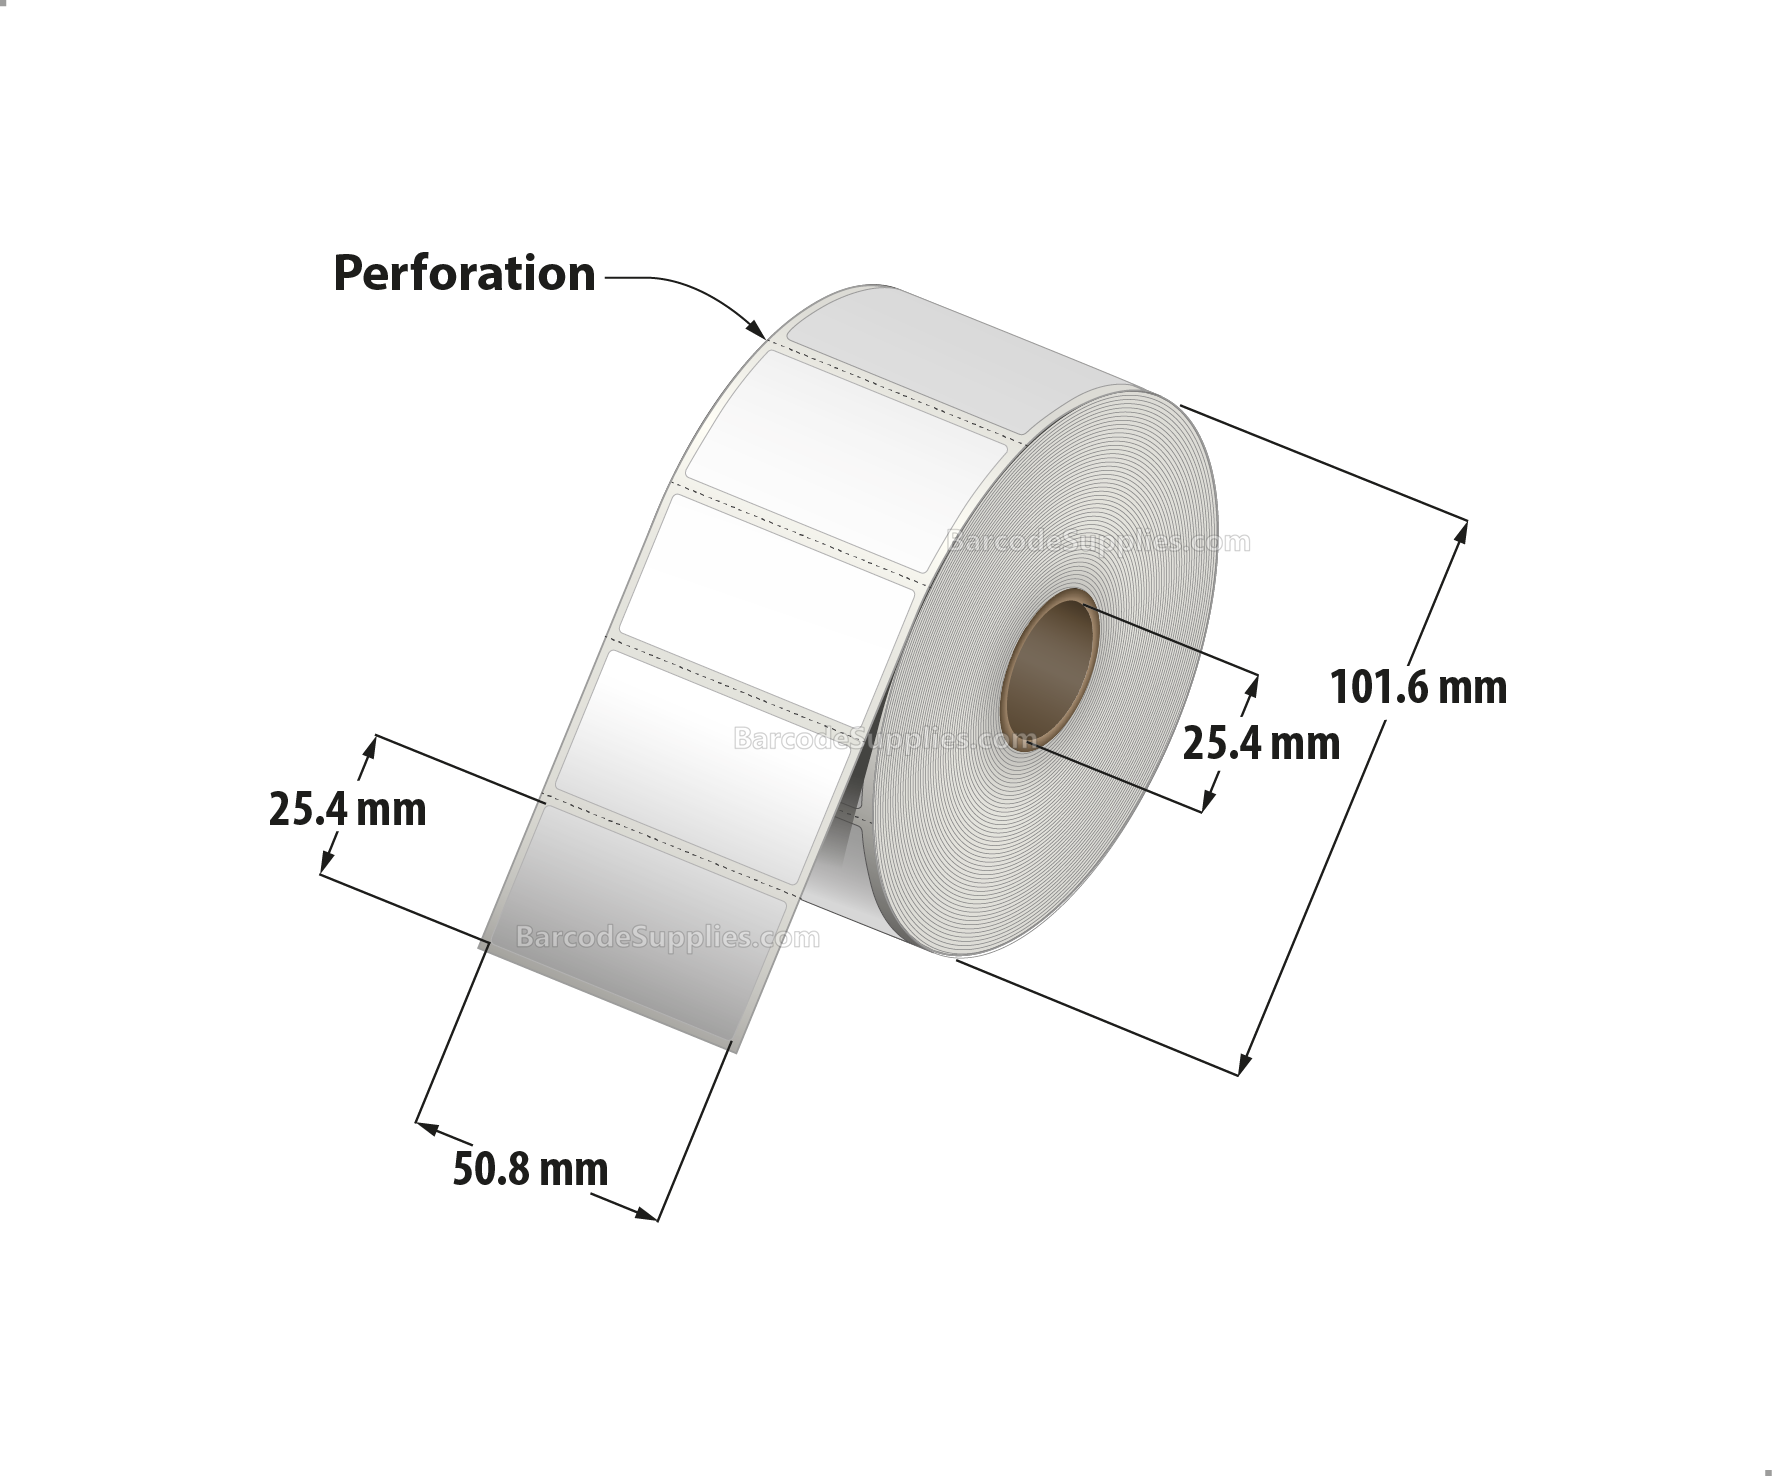 2 x 1 Thermal Transfer White Labels With Permanent Acrylic Adhesive - Perforated - 1380 Labels Per Roll - Carton Of 4 Rolls - 5520 Labels Total - MPN: TH21-14PTTPOLY